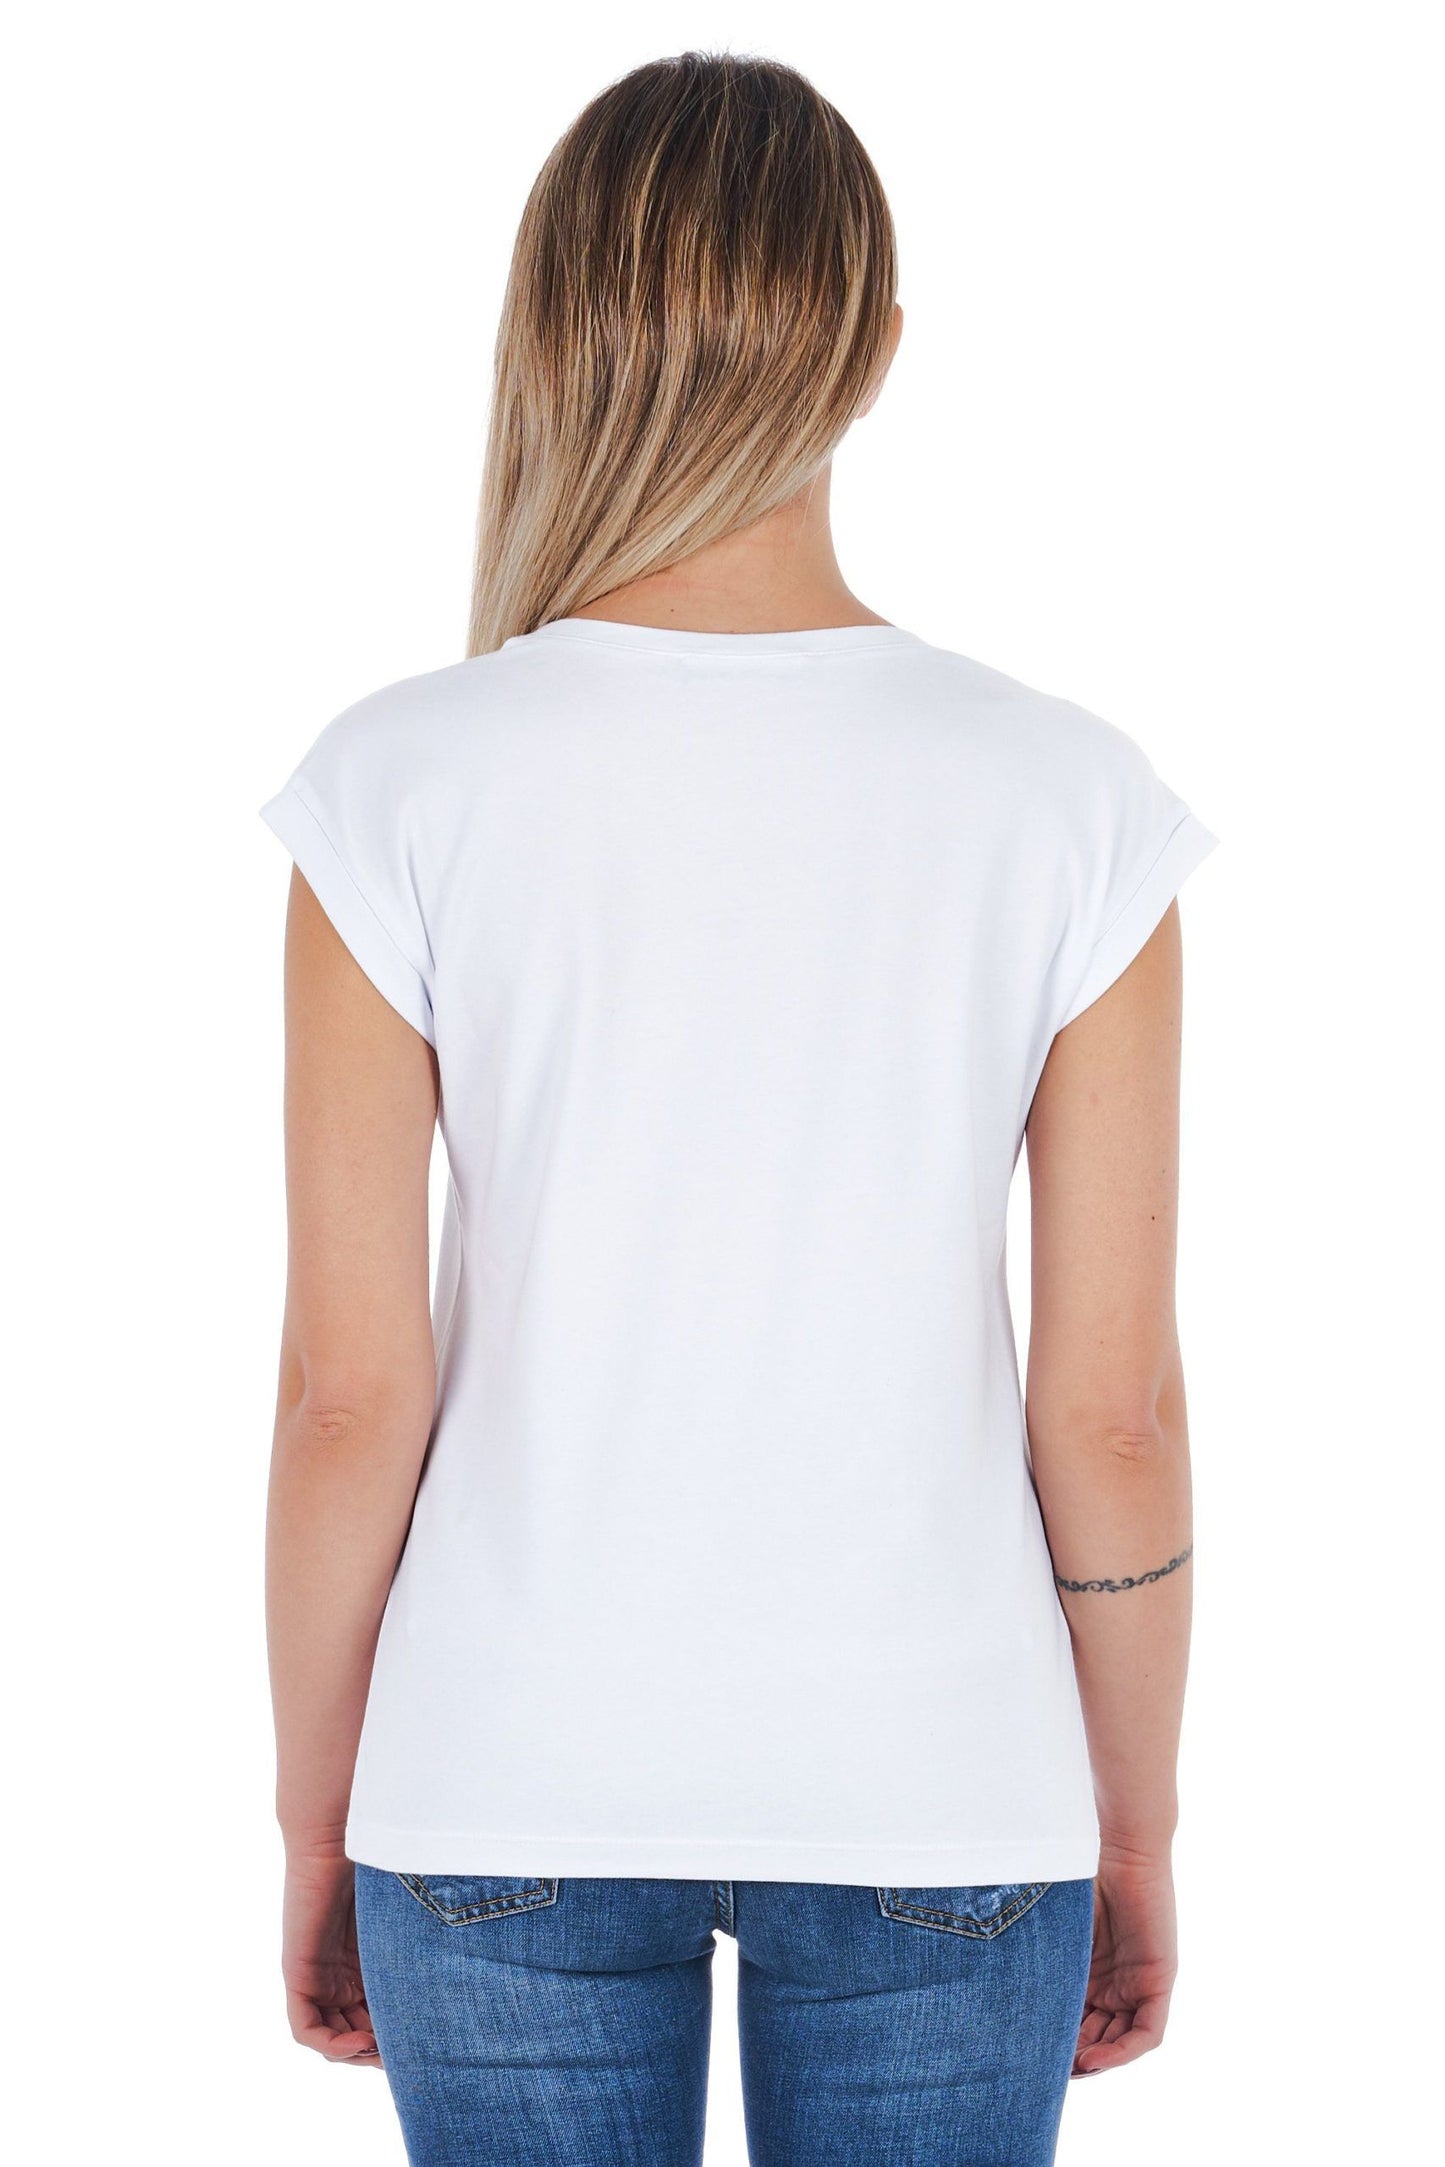 Chic White Front Print Tee